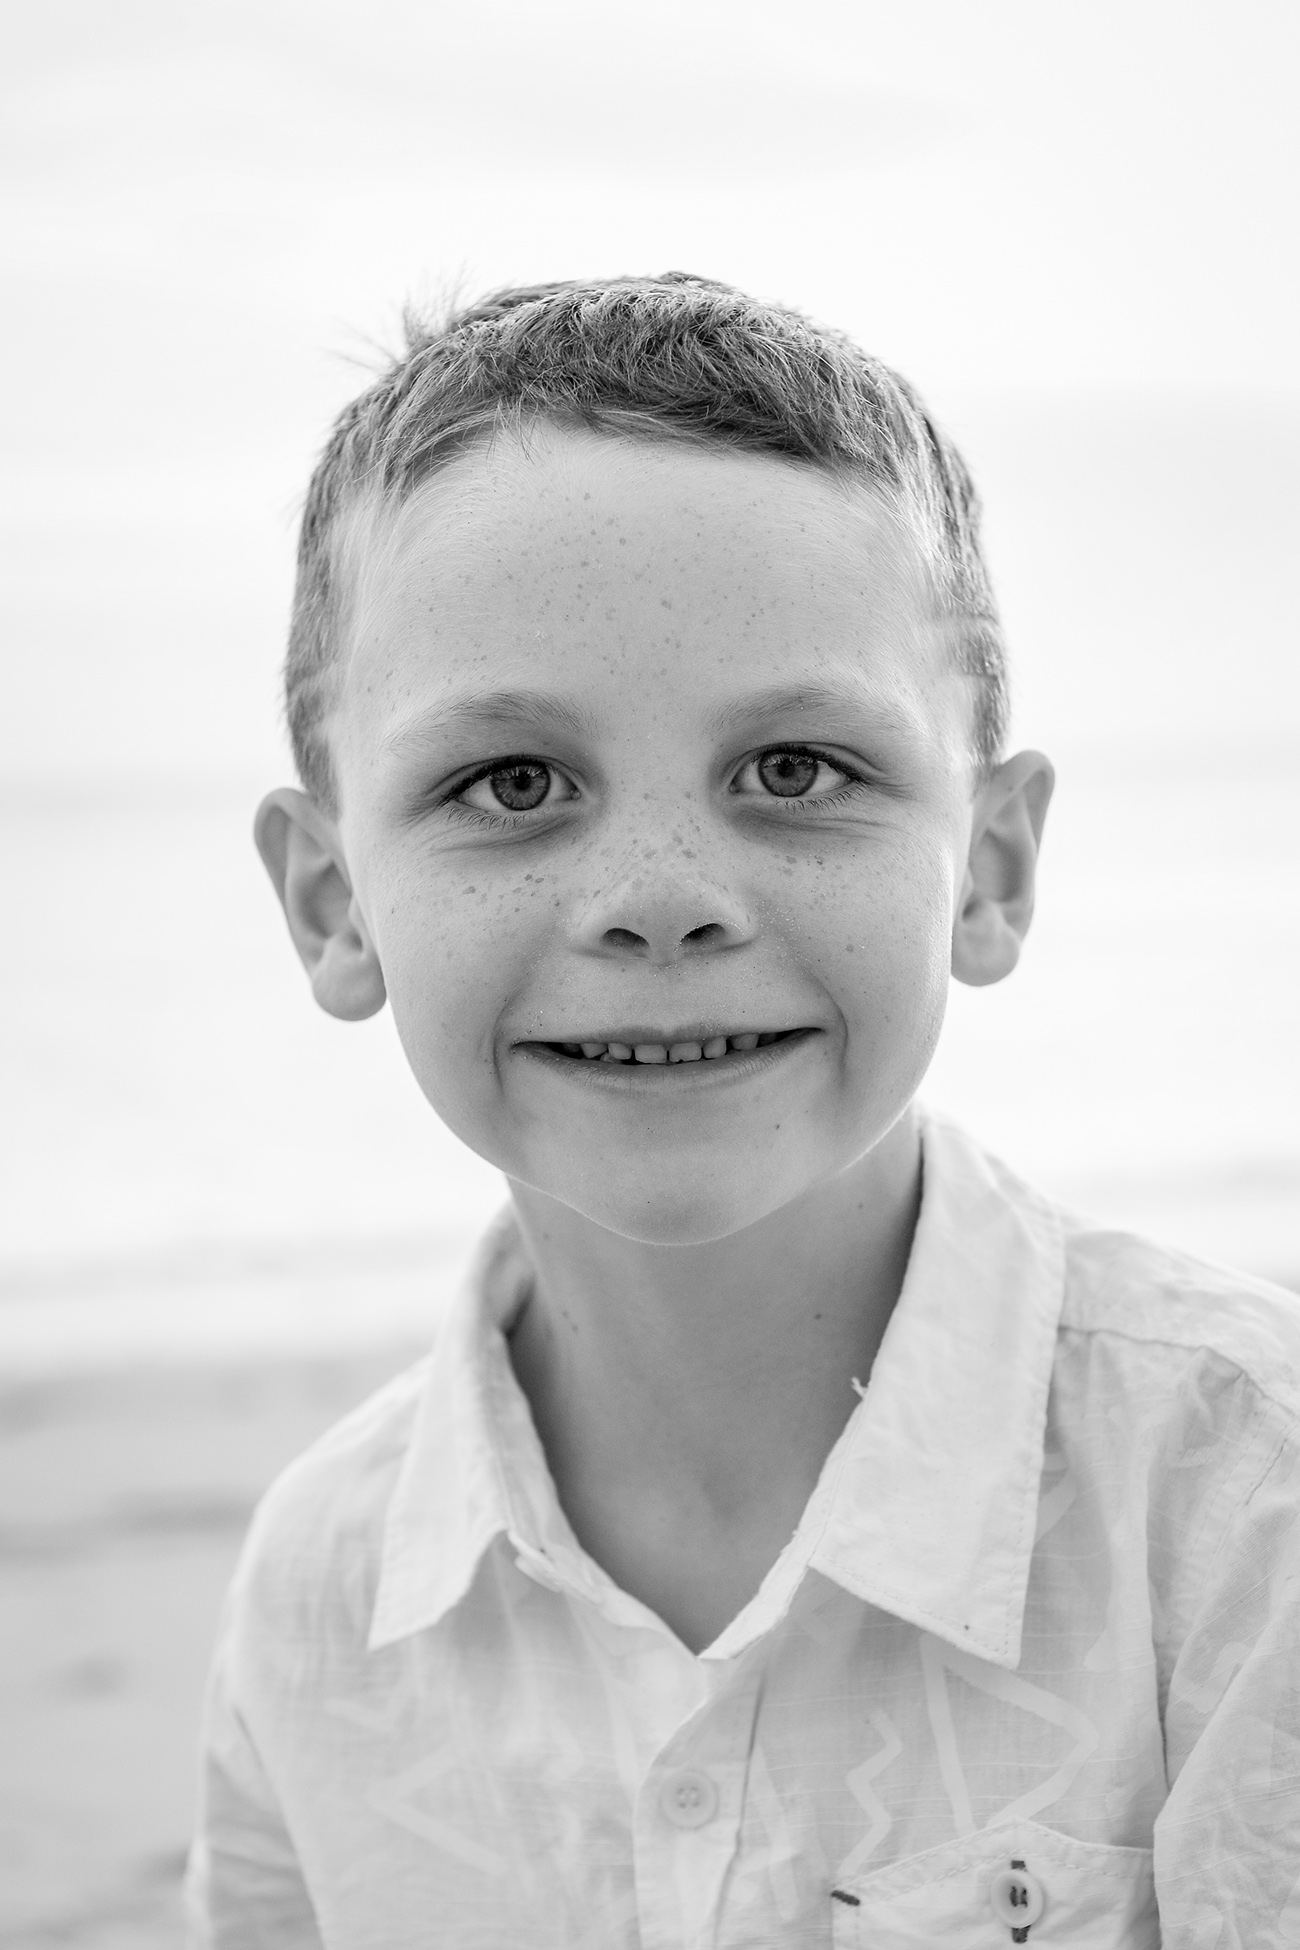 Black and white picture of young boy on the beach